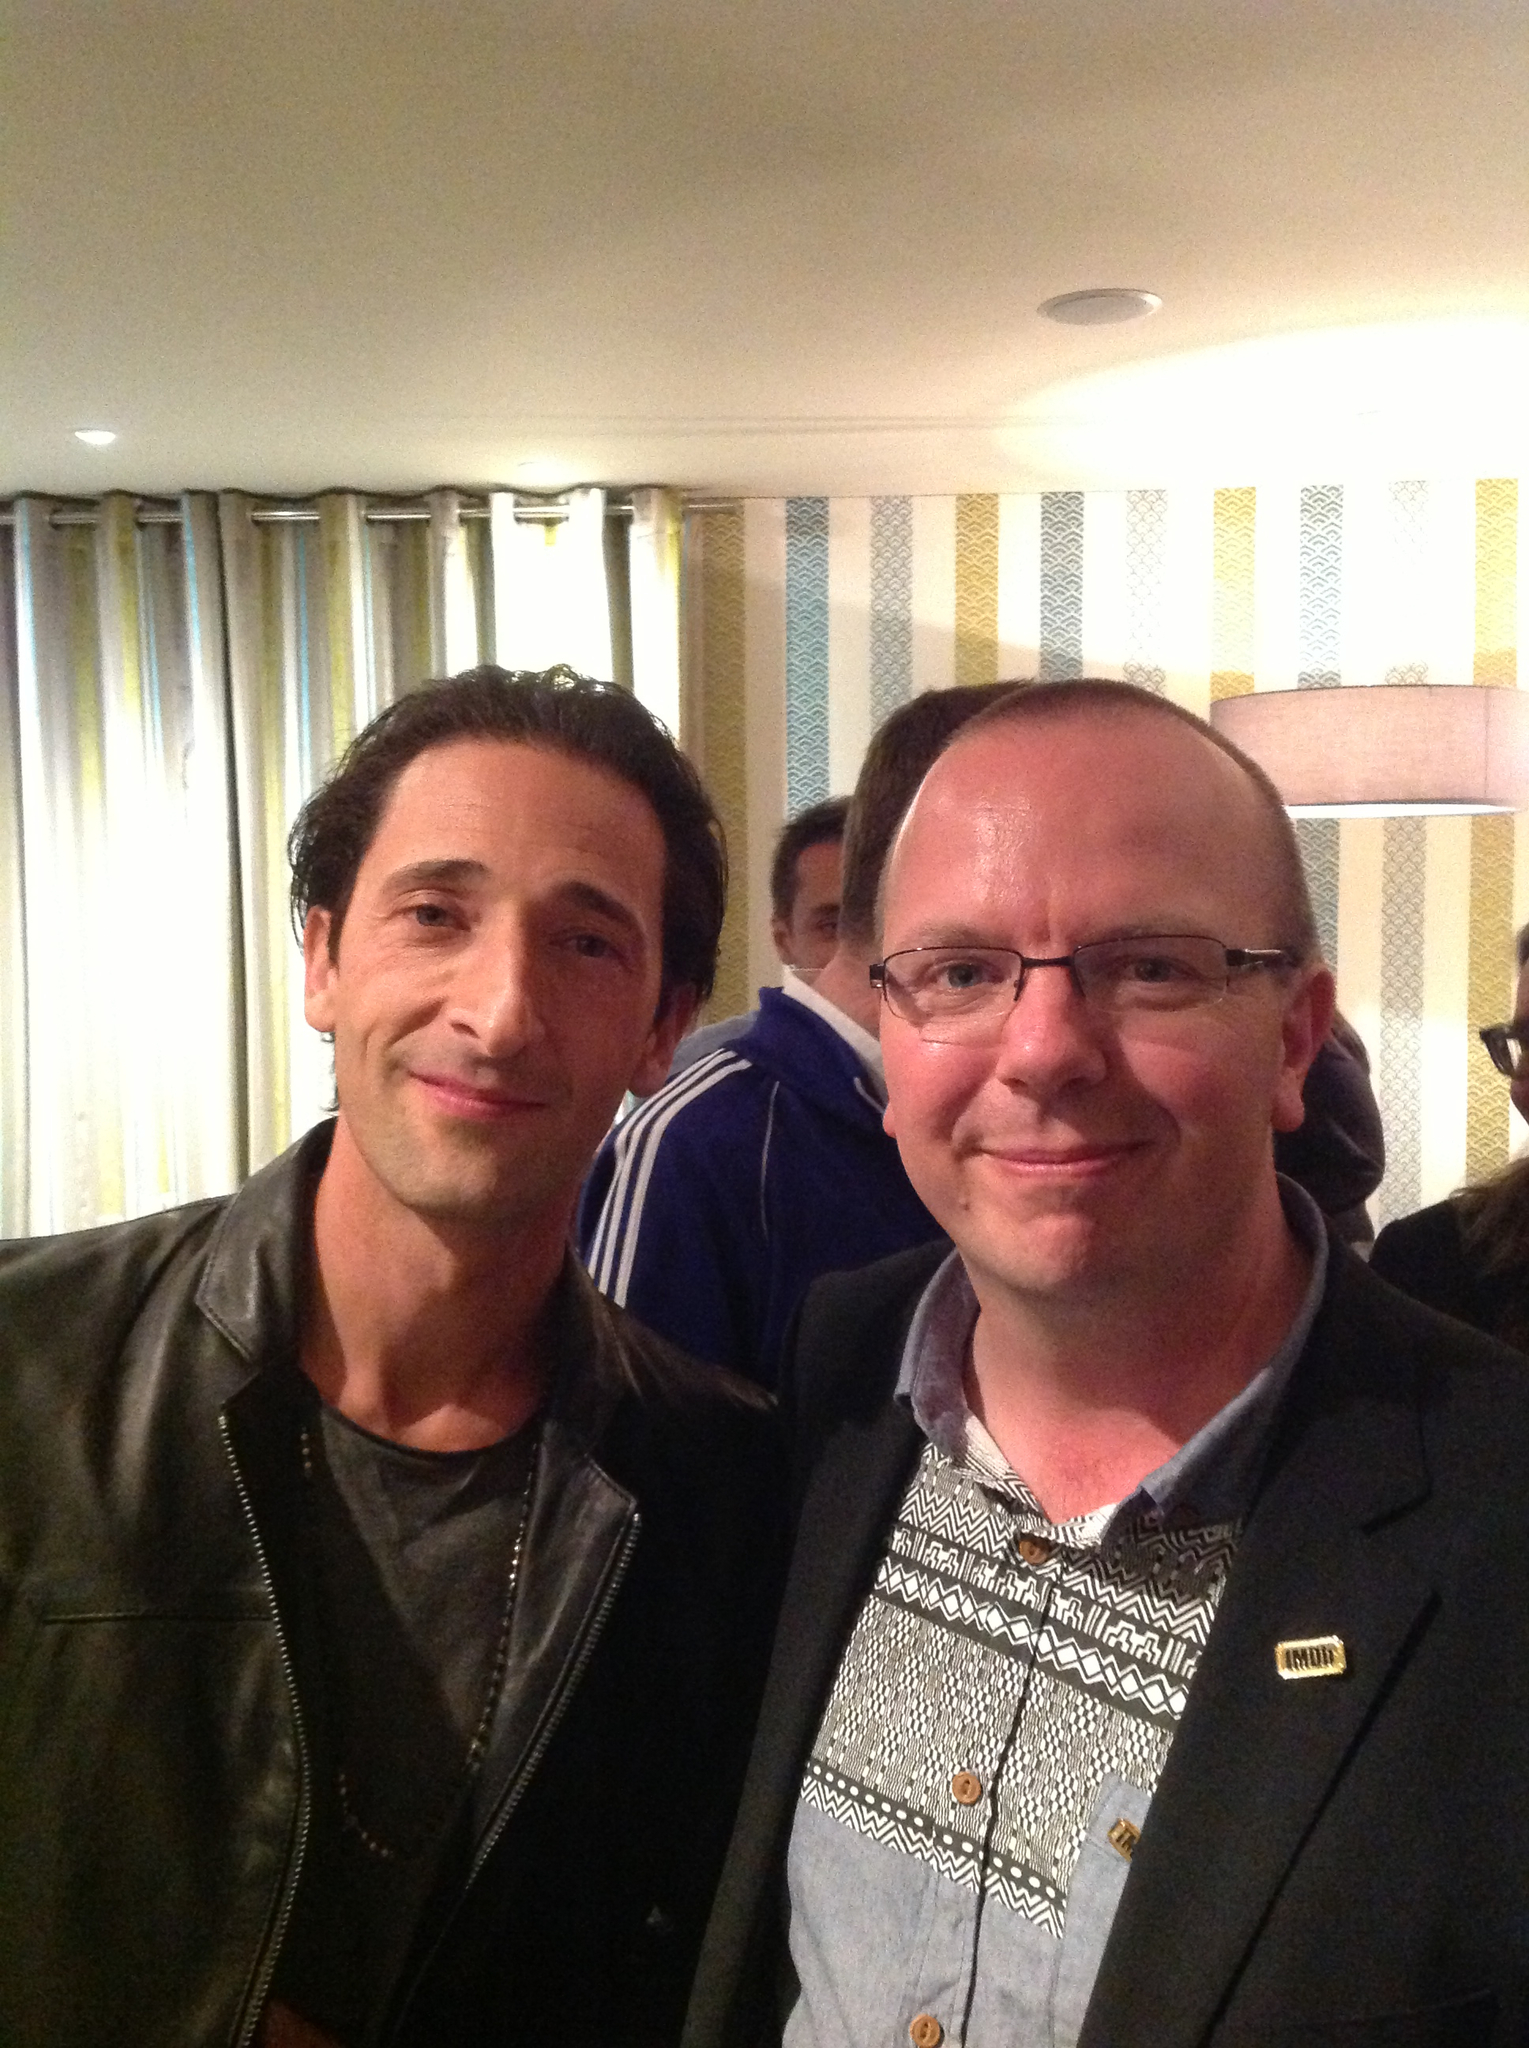 Adrien Brody and IMDb founder Col Needham attend the IMDb's 2013 Cannes Film Festival Dinner Party during the 66th Annual Cannes Film Festival at Restaurant Mantel on May 20, 2013 in Cannes, France.